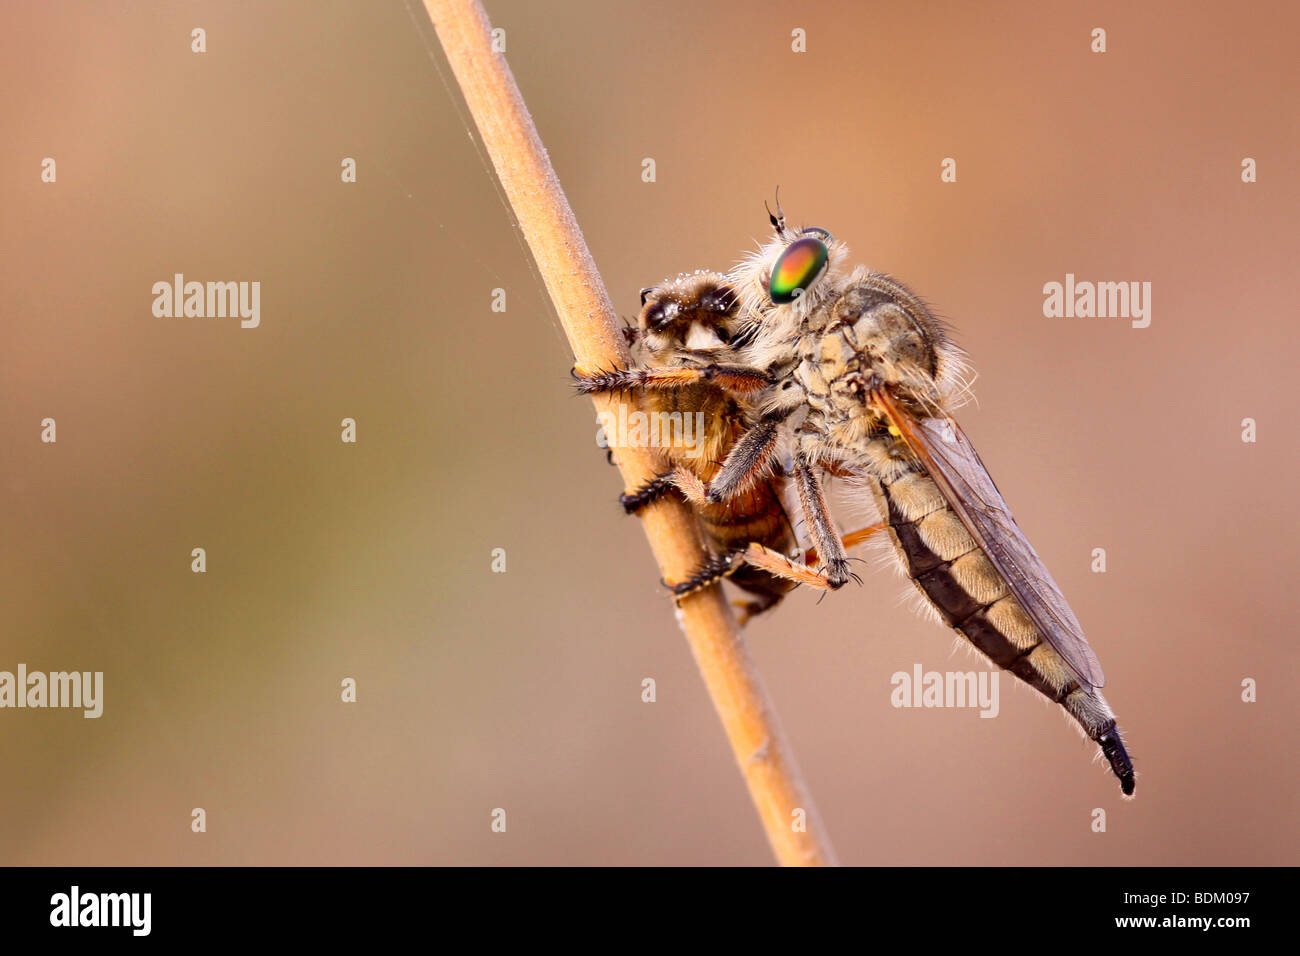 robber fly (Asilidae) feeds off a captured honey bee by sucking out the body fluids of the prey Stock Photo